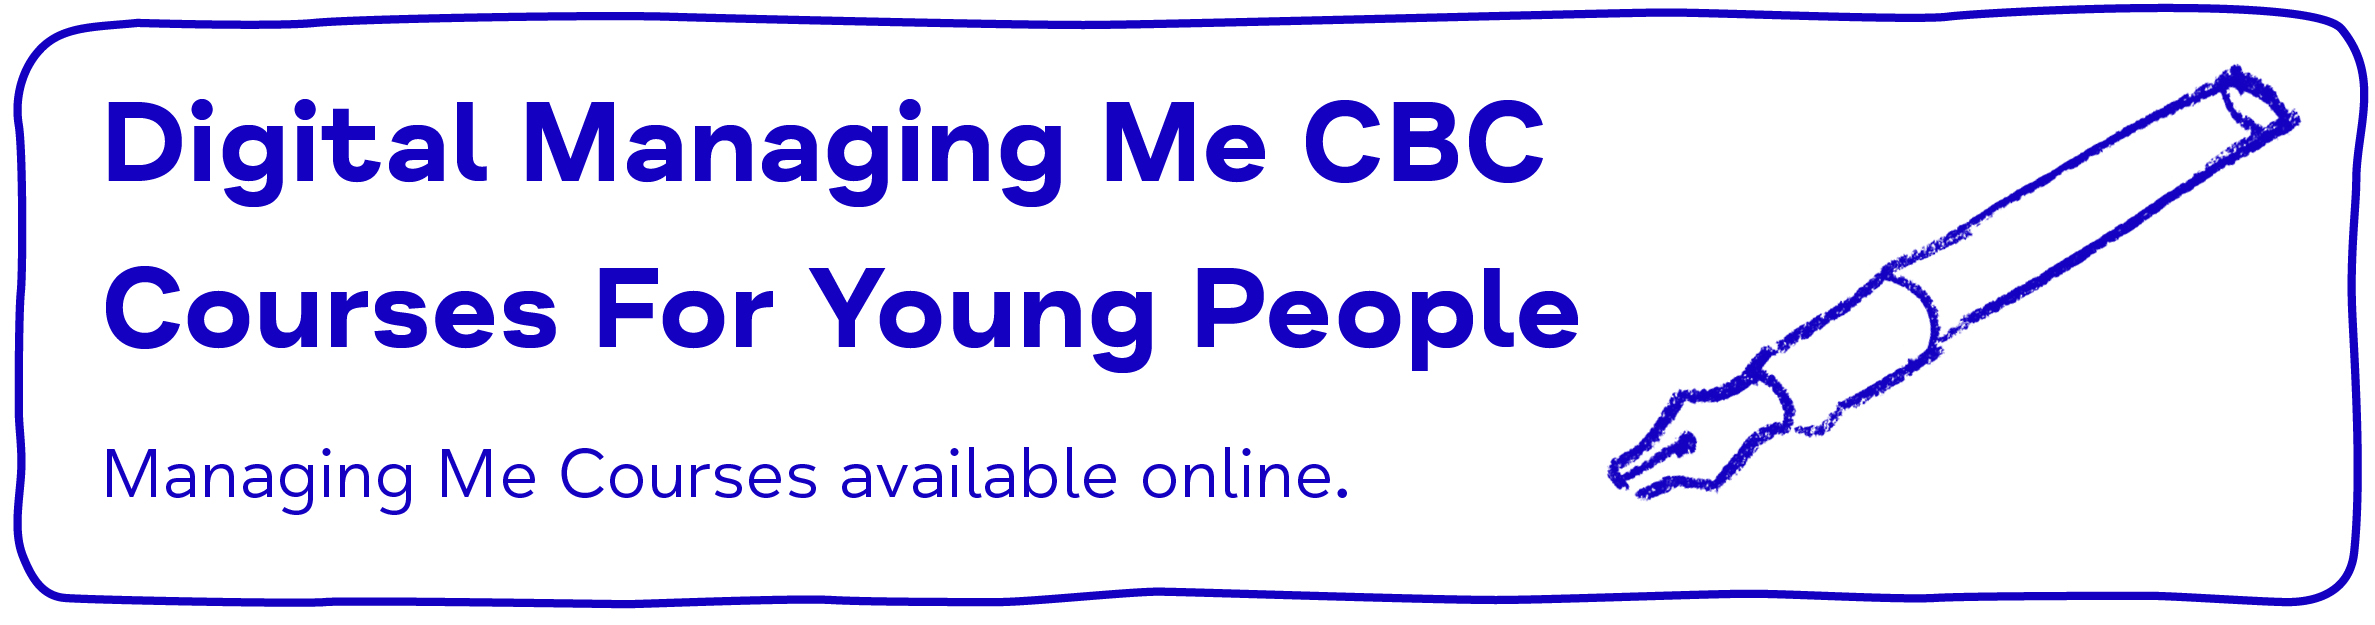 Digital Managing Me CBC Courses For Young People - Managing Me Courses available online.